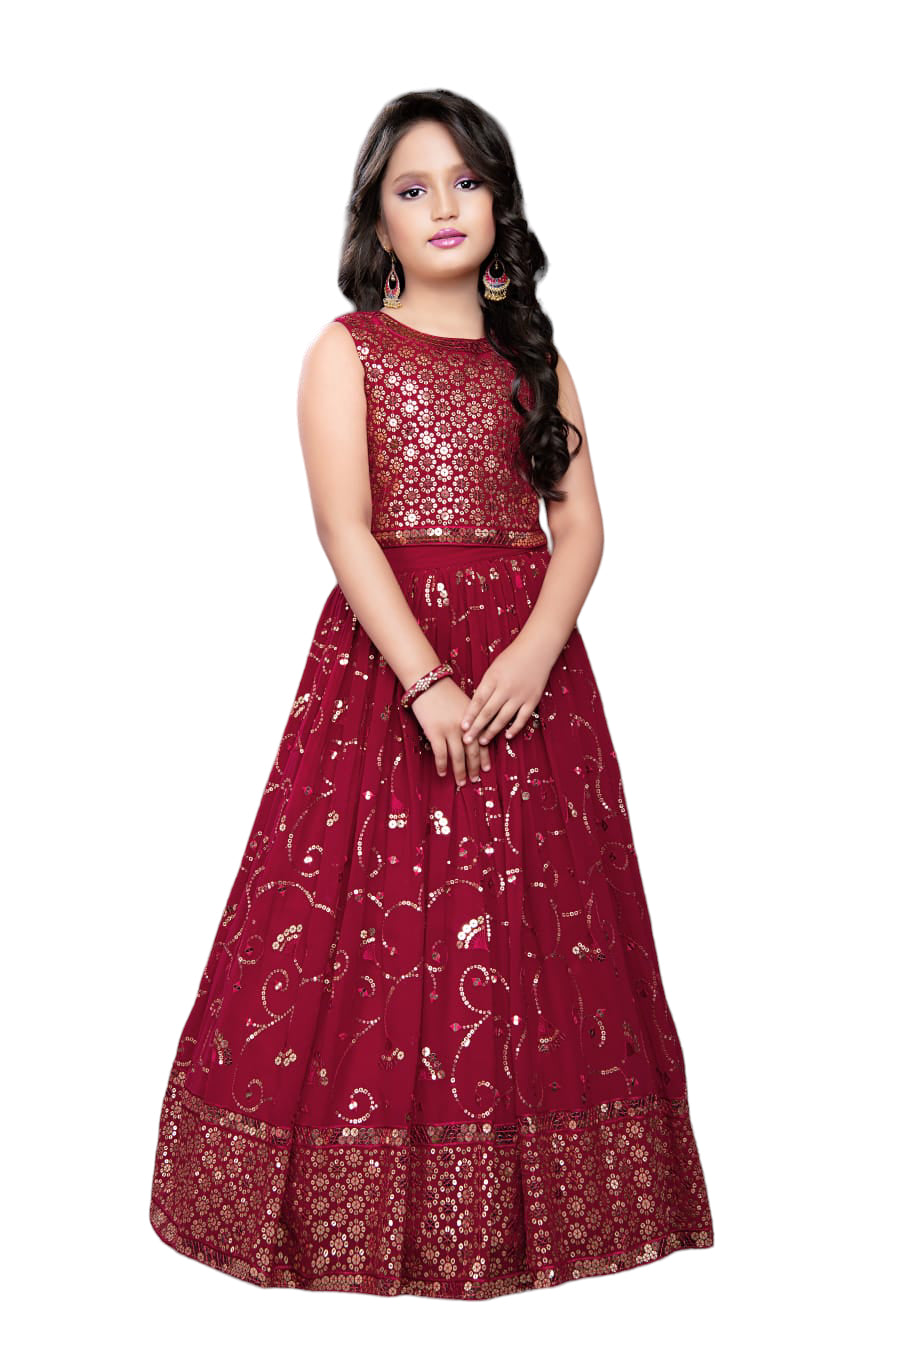 MAROON COLORED TWO PIECE LEHENGA SET WITH INTRICATE SEQUIN EMBROIDERY